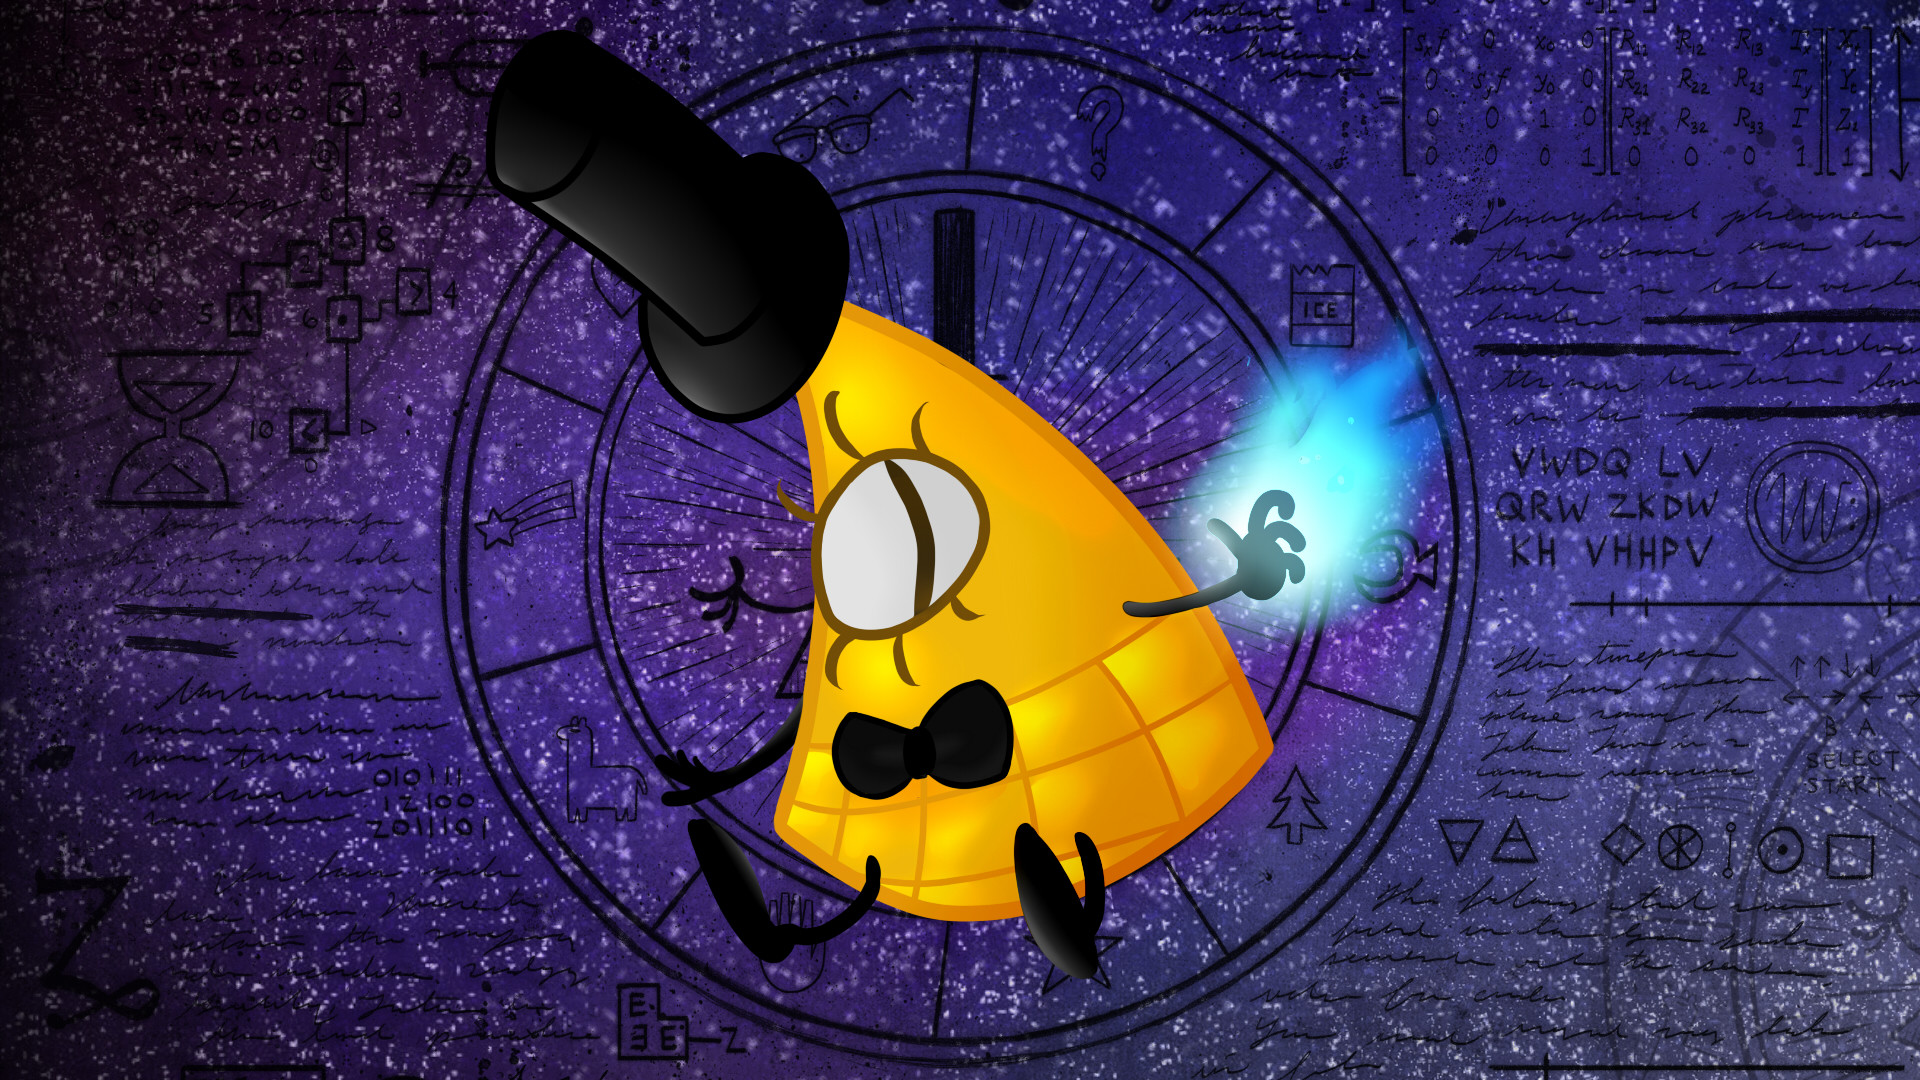 1920x1080 ... Bill Cipher Wallpaper - Collab with Meh-Chaan by Nelythia